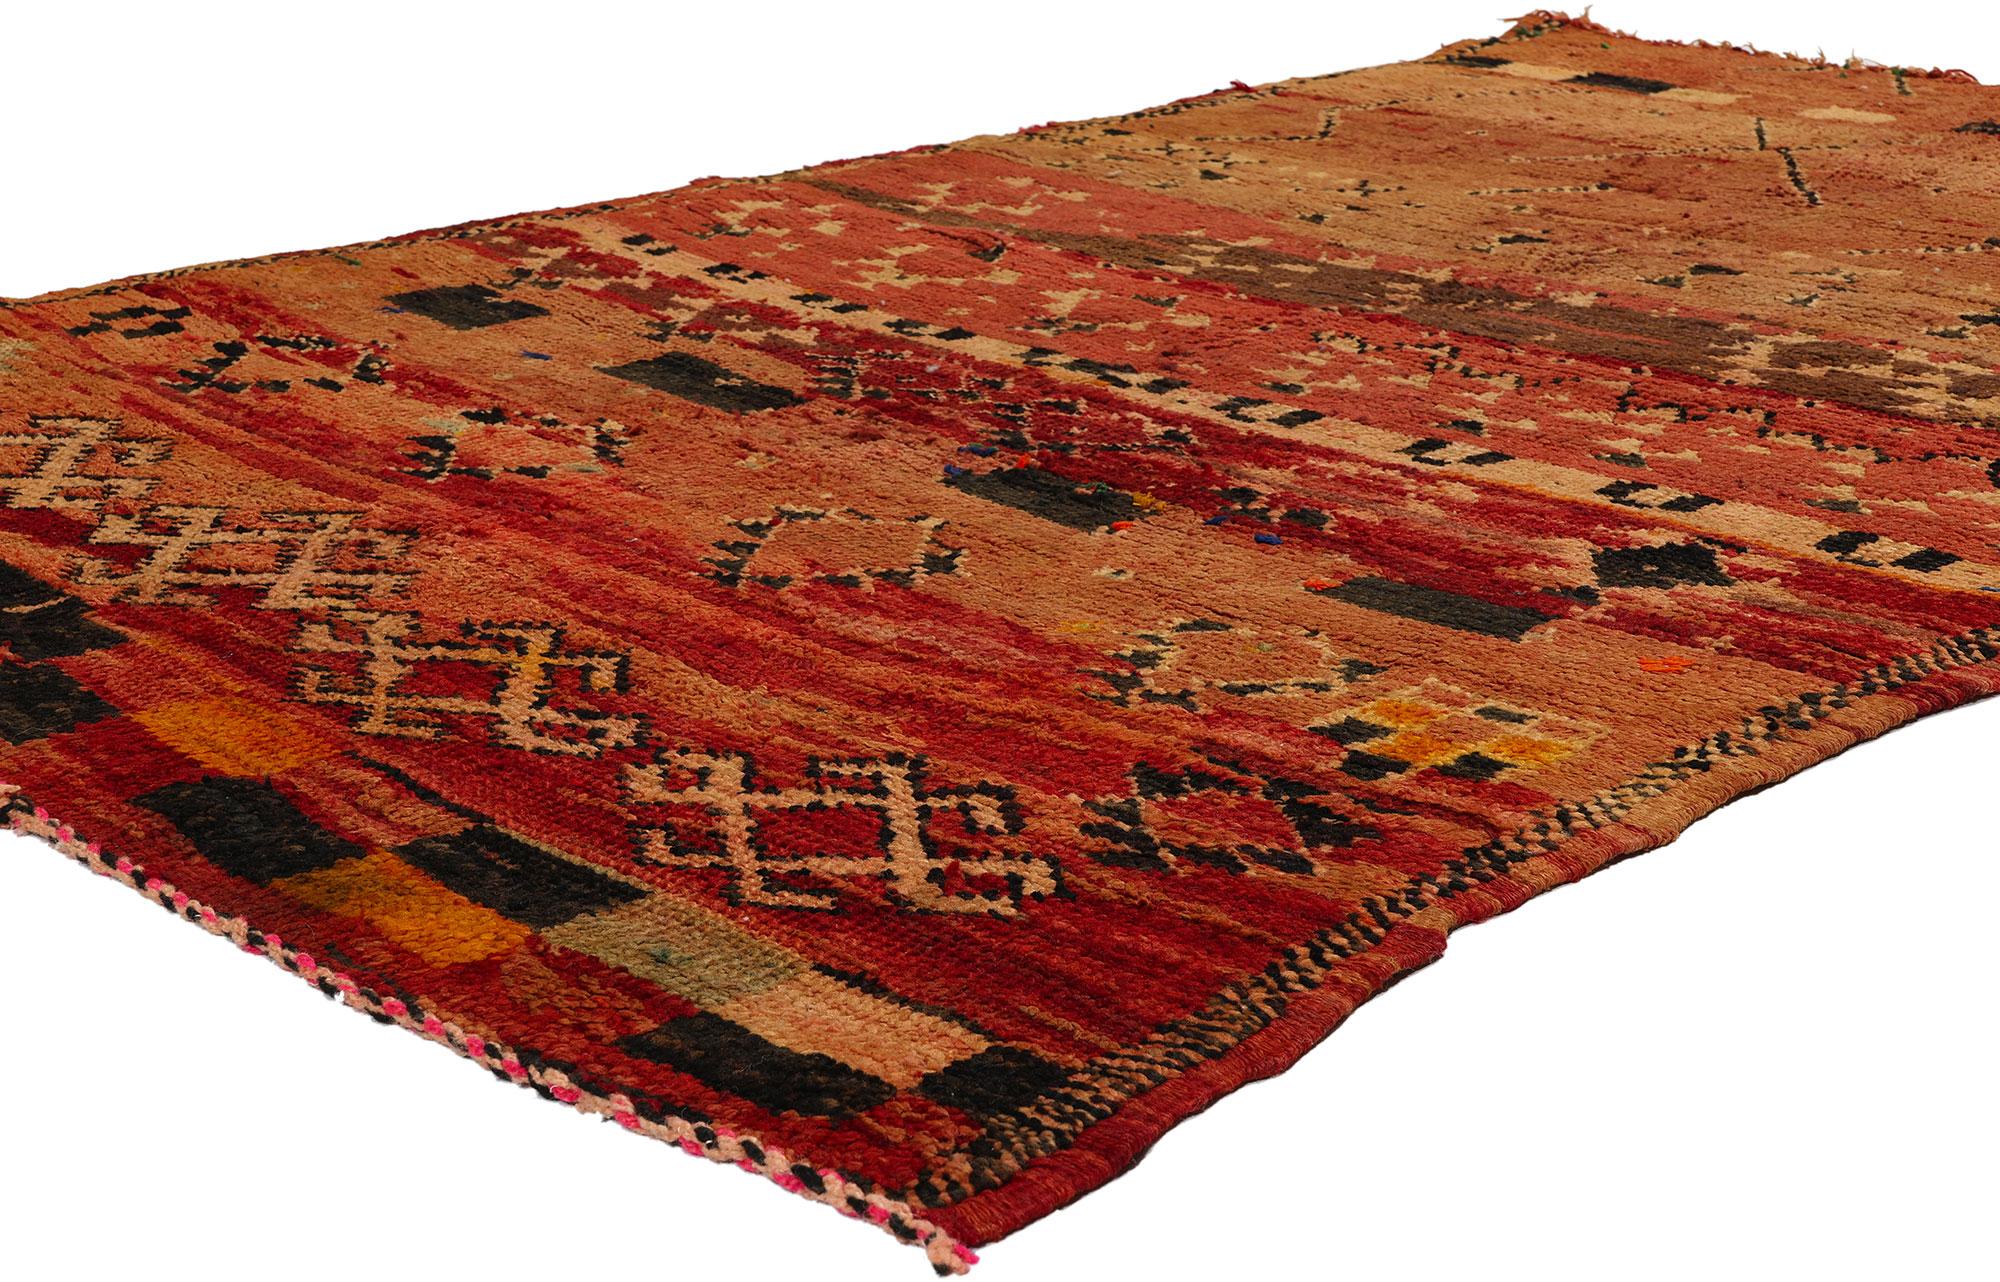 21727 Vintage Red Boujad Moroccan Rug, 04'09 x 07'03. Hailing from Morocco's Boujad region, Boujad rugs stand as more than mere floor coverings; they are intricate handwoven treasures that embody the vibrant artistic legacy of Berber tribes,